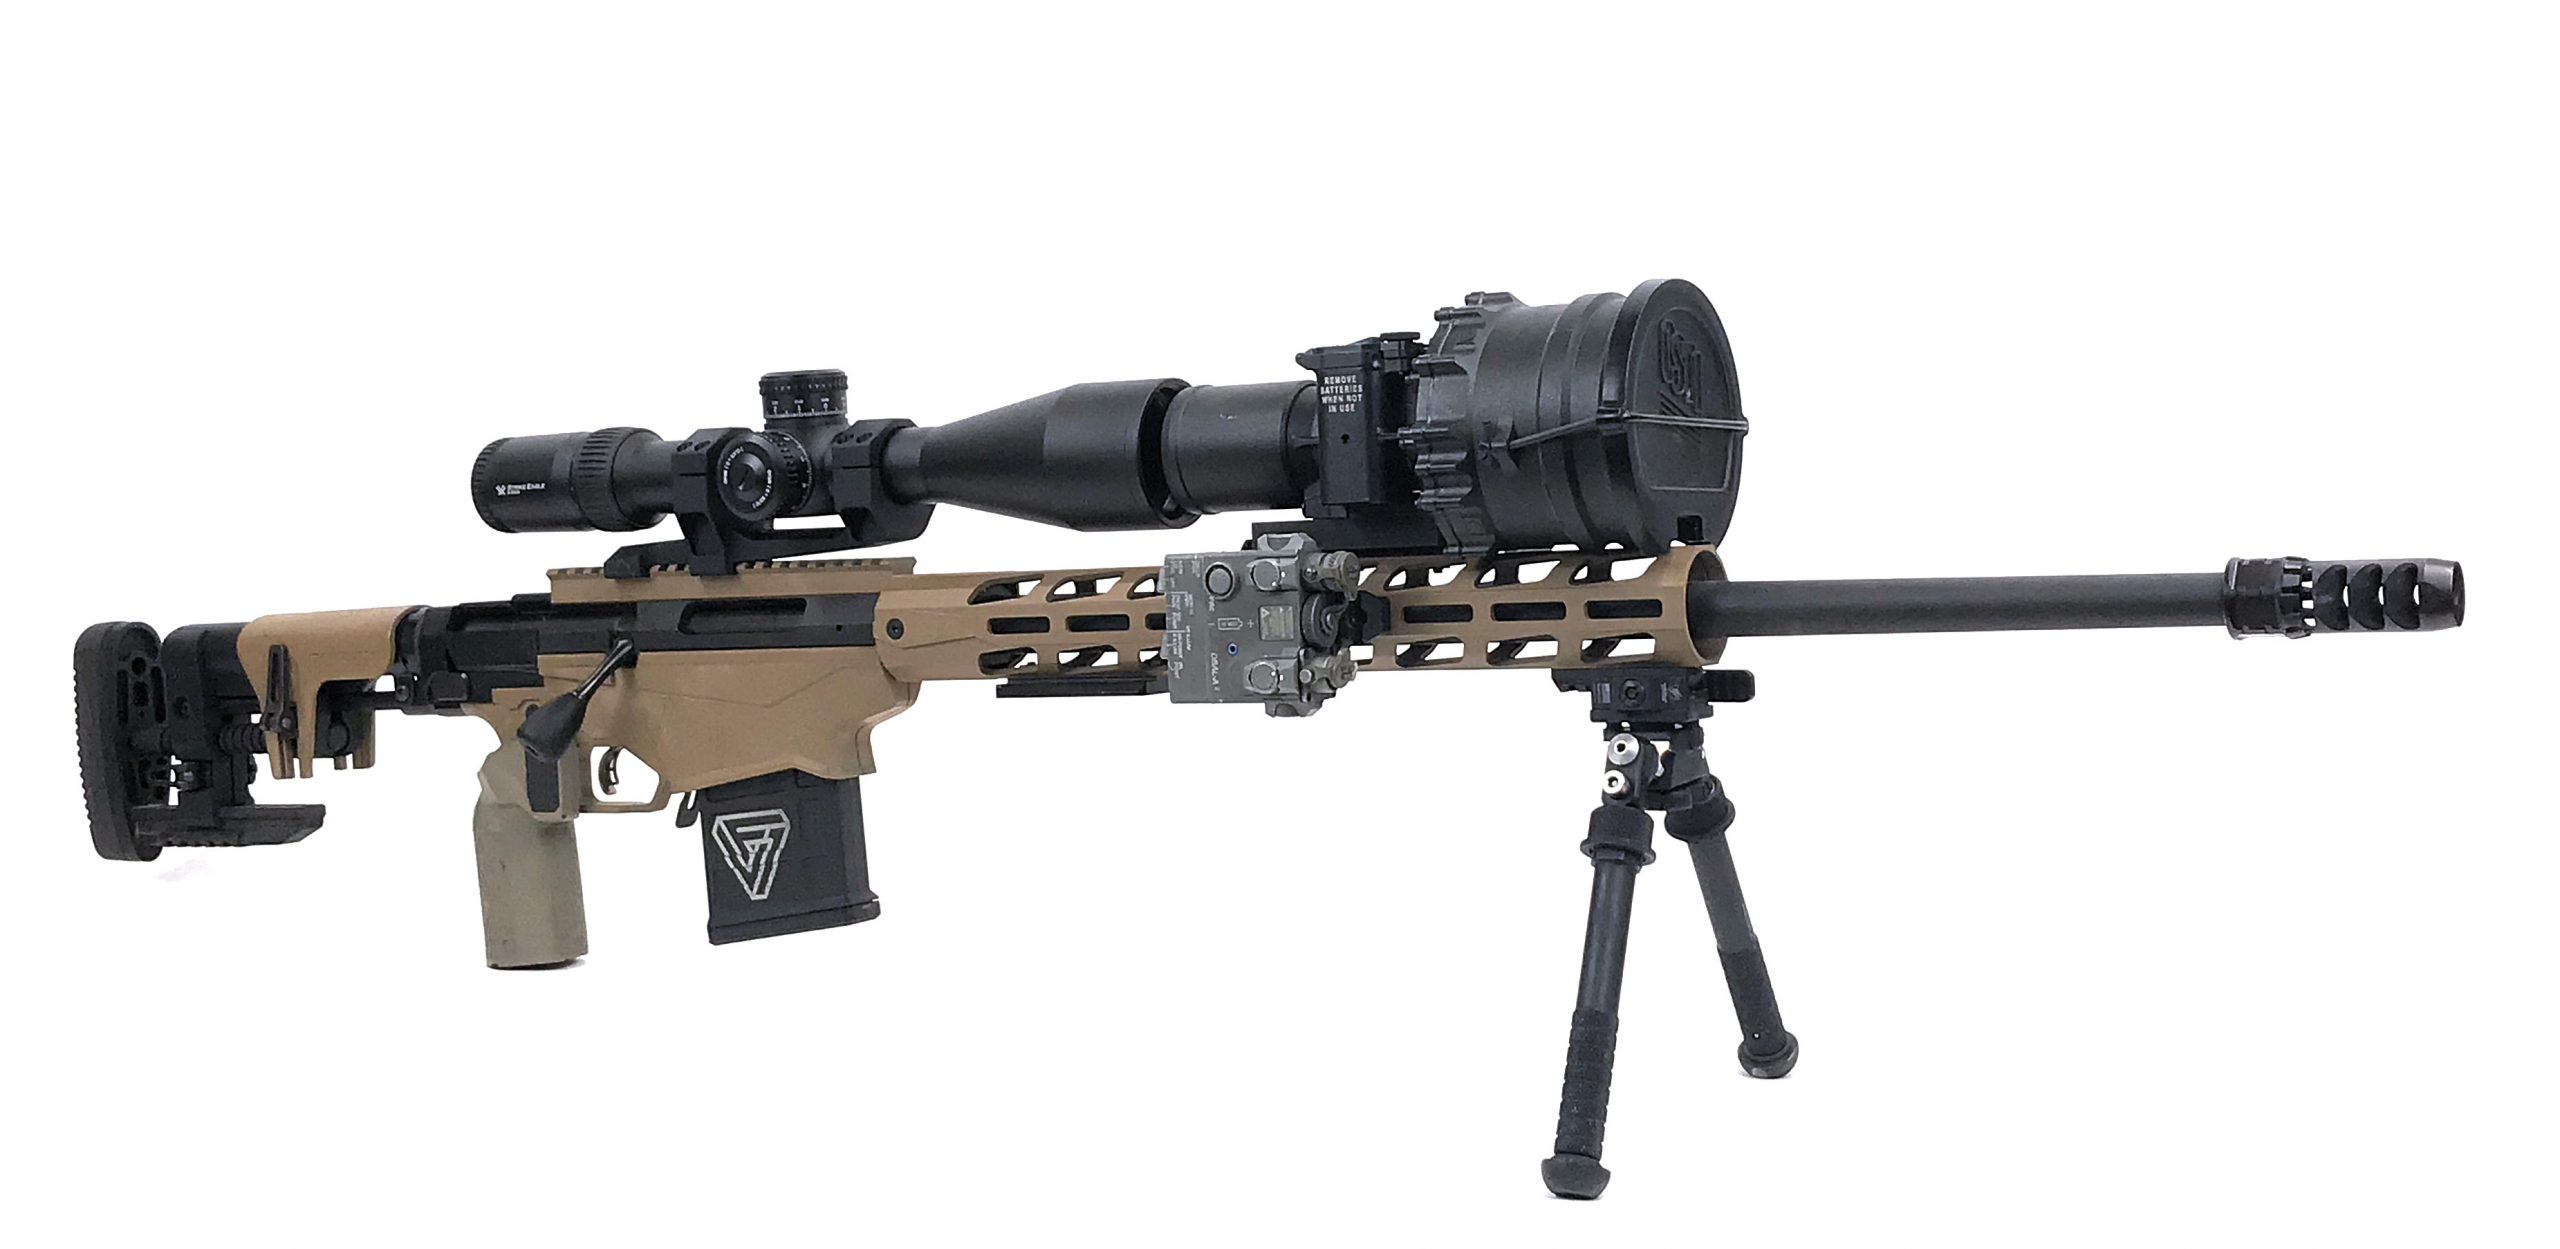 Ruger Precision Rifle Discussion | Page 101 | Sniper's Hide Forum